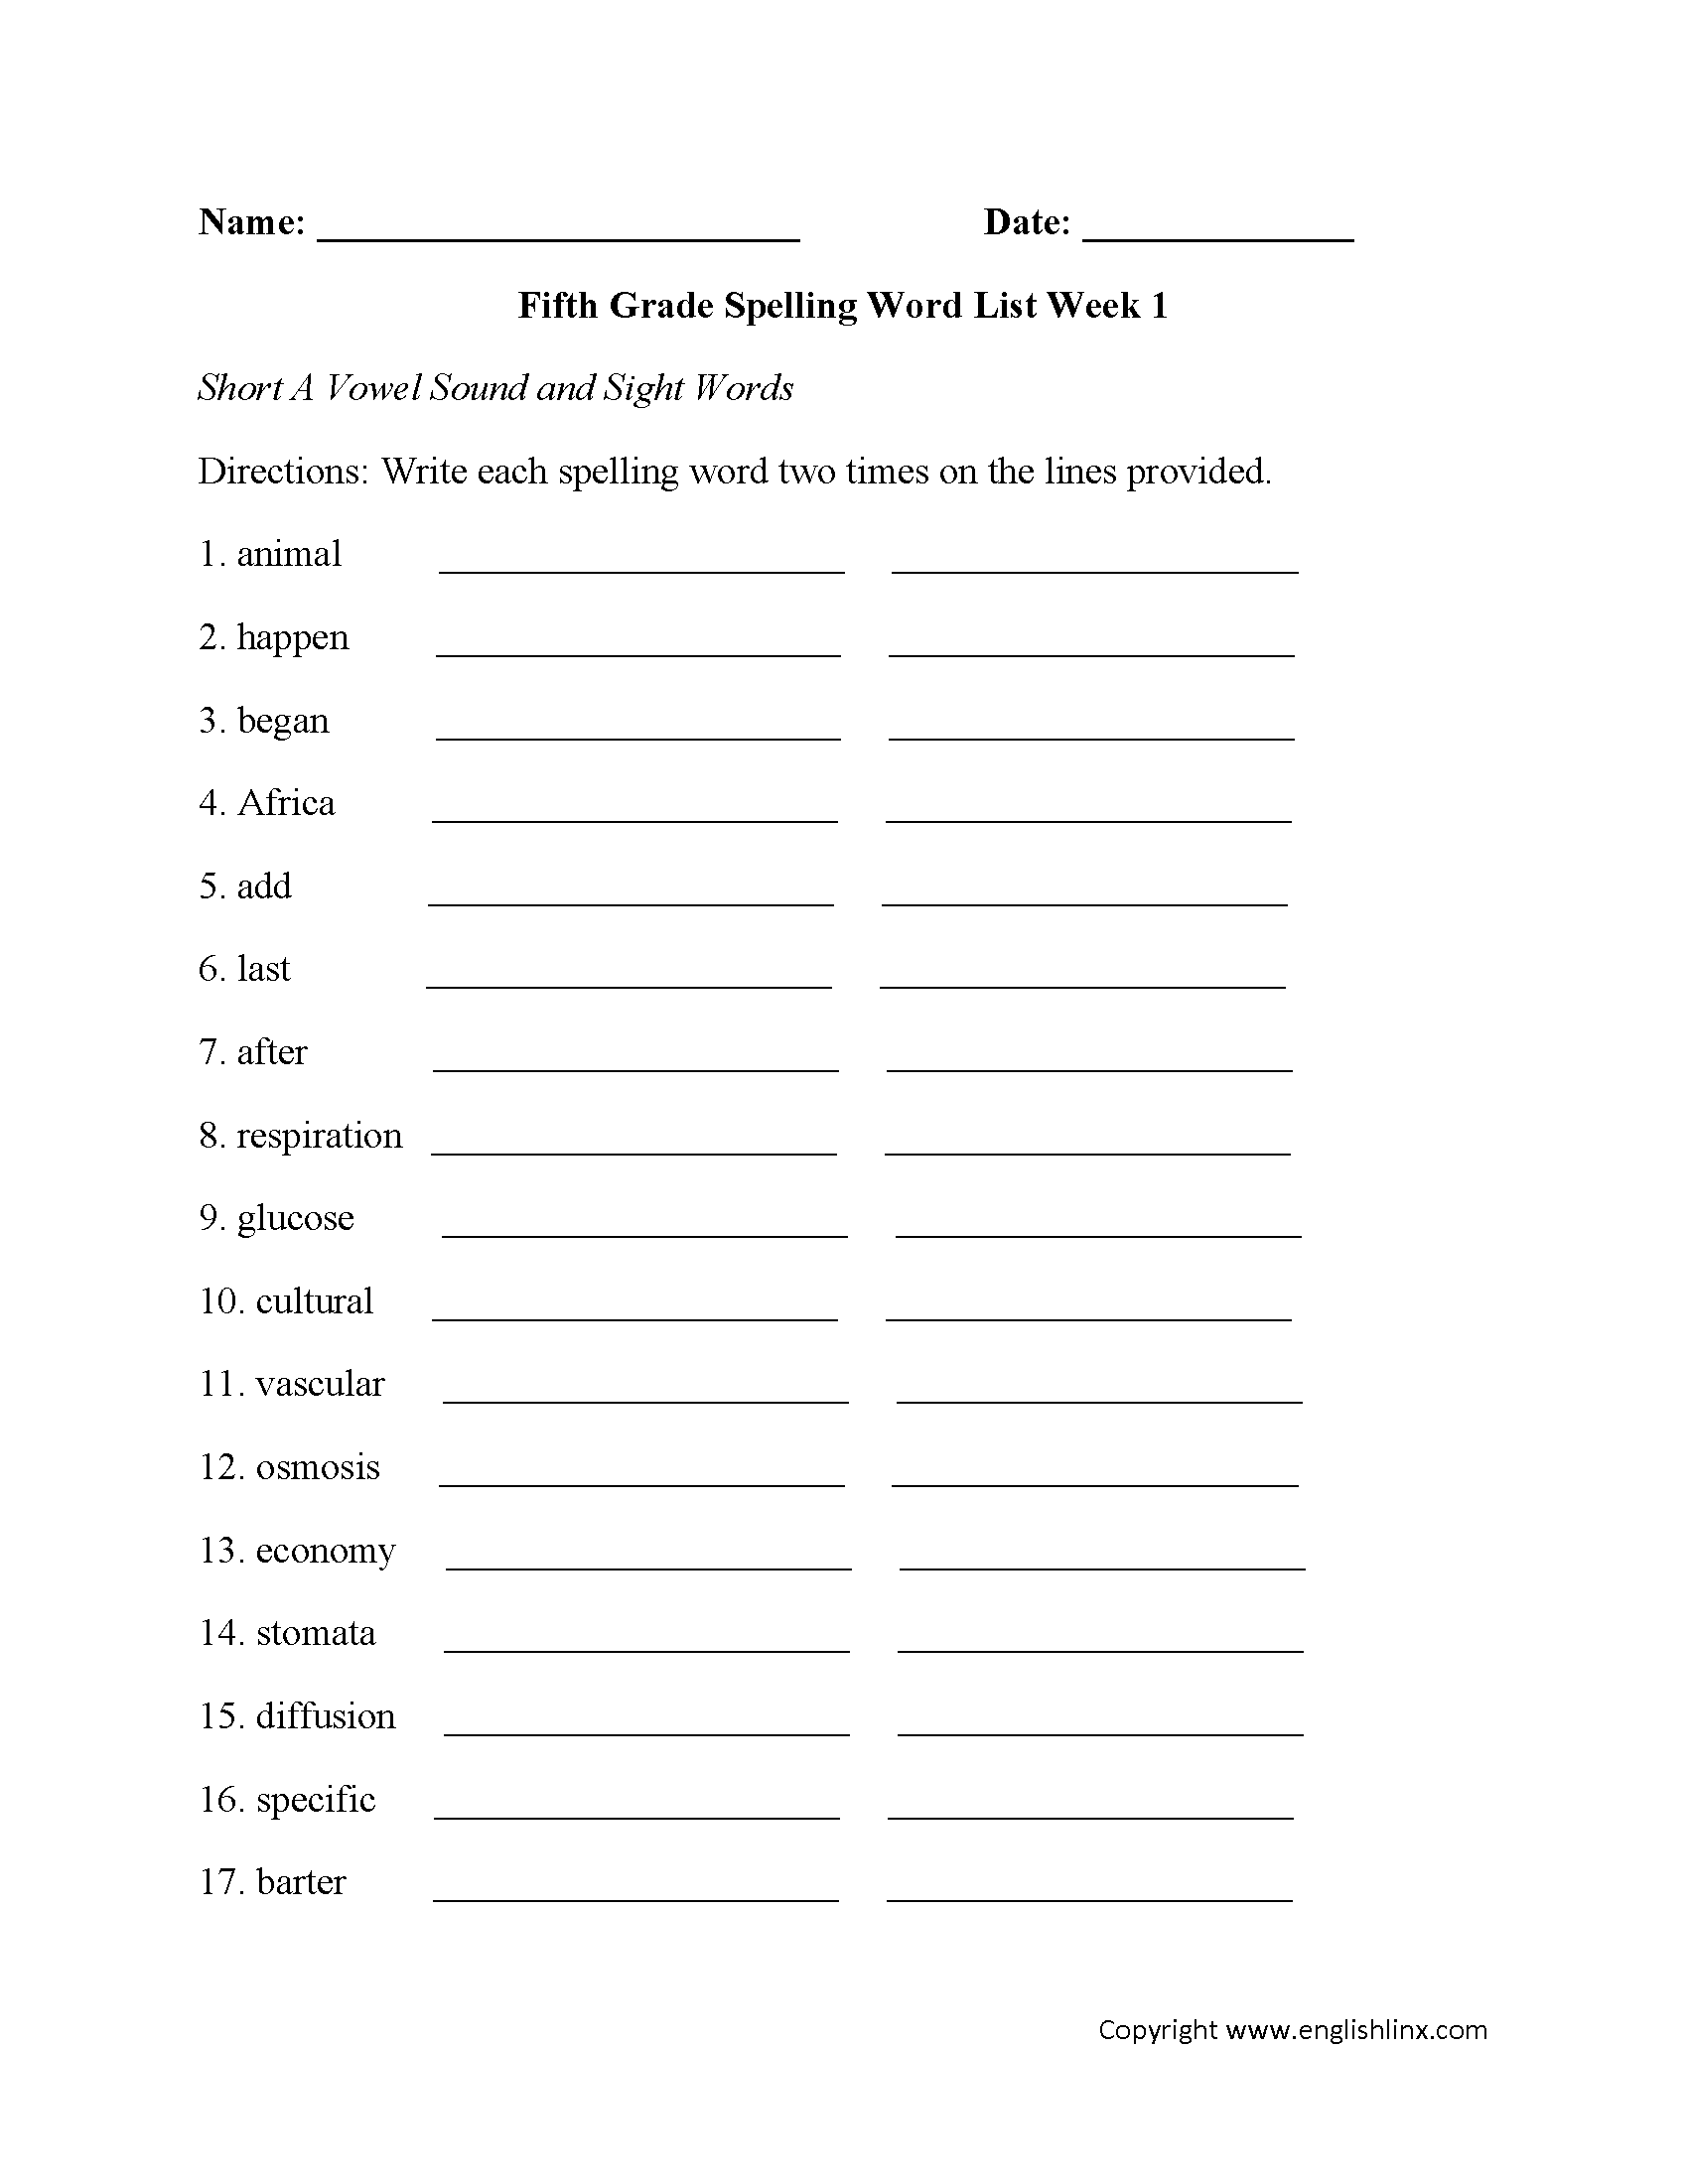 Week 1 Short A Vowel and Sight Words Fifth Grade Spelling Words Worksheets